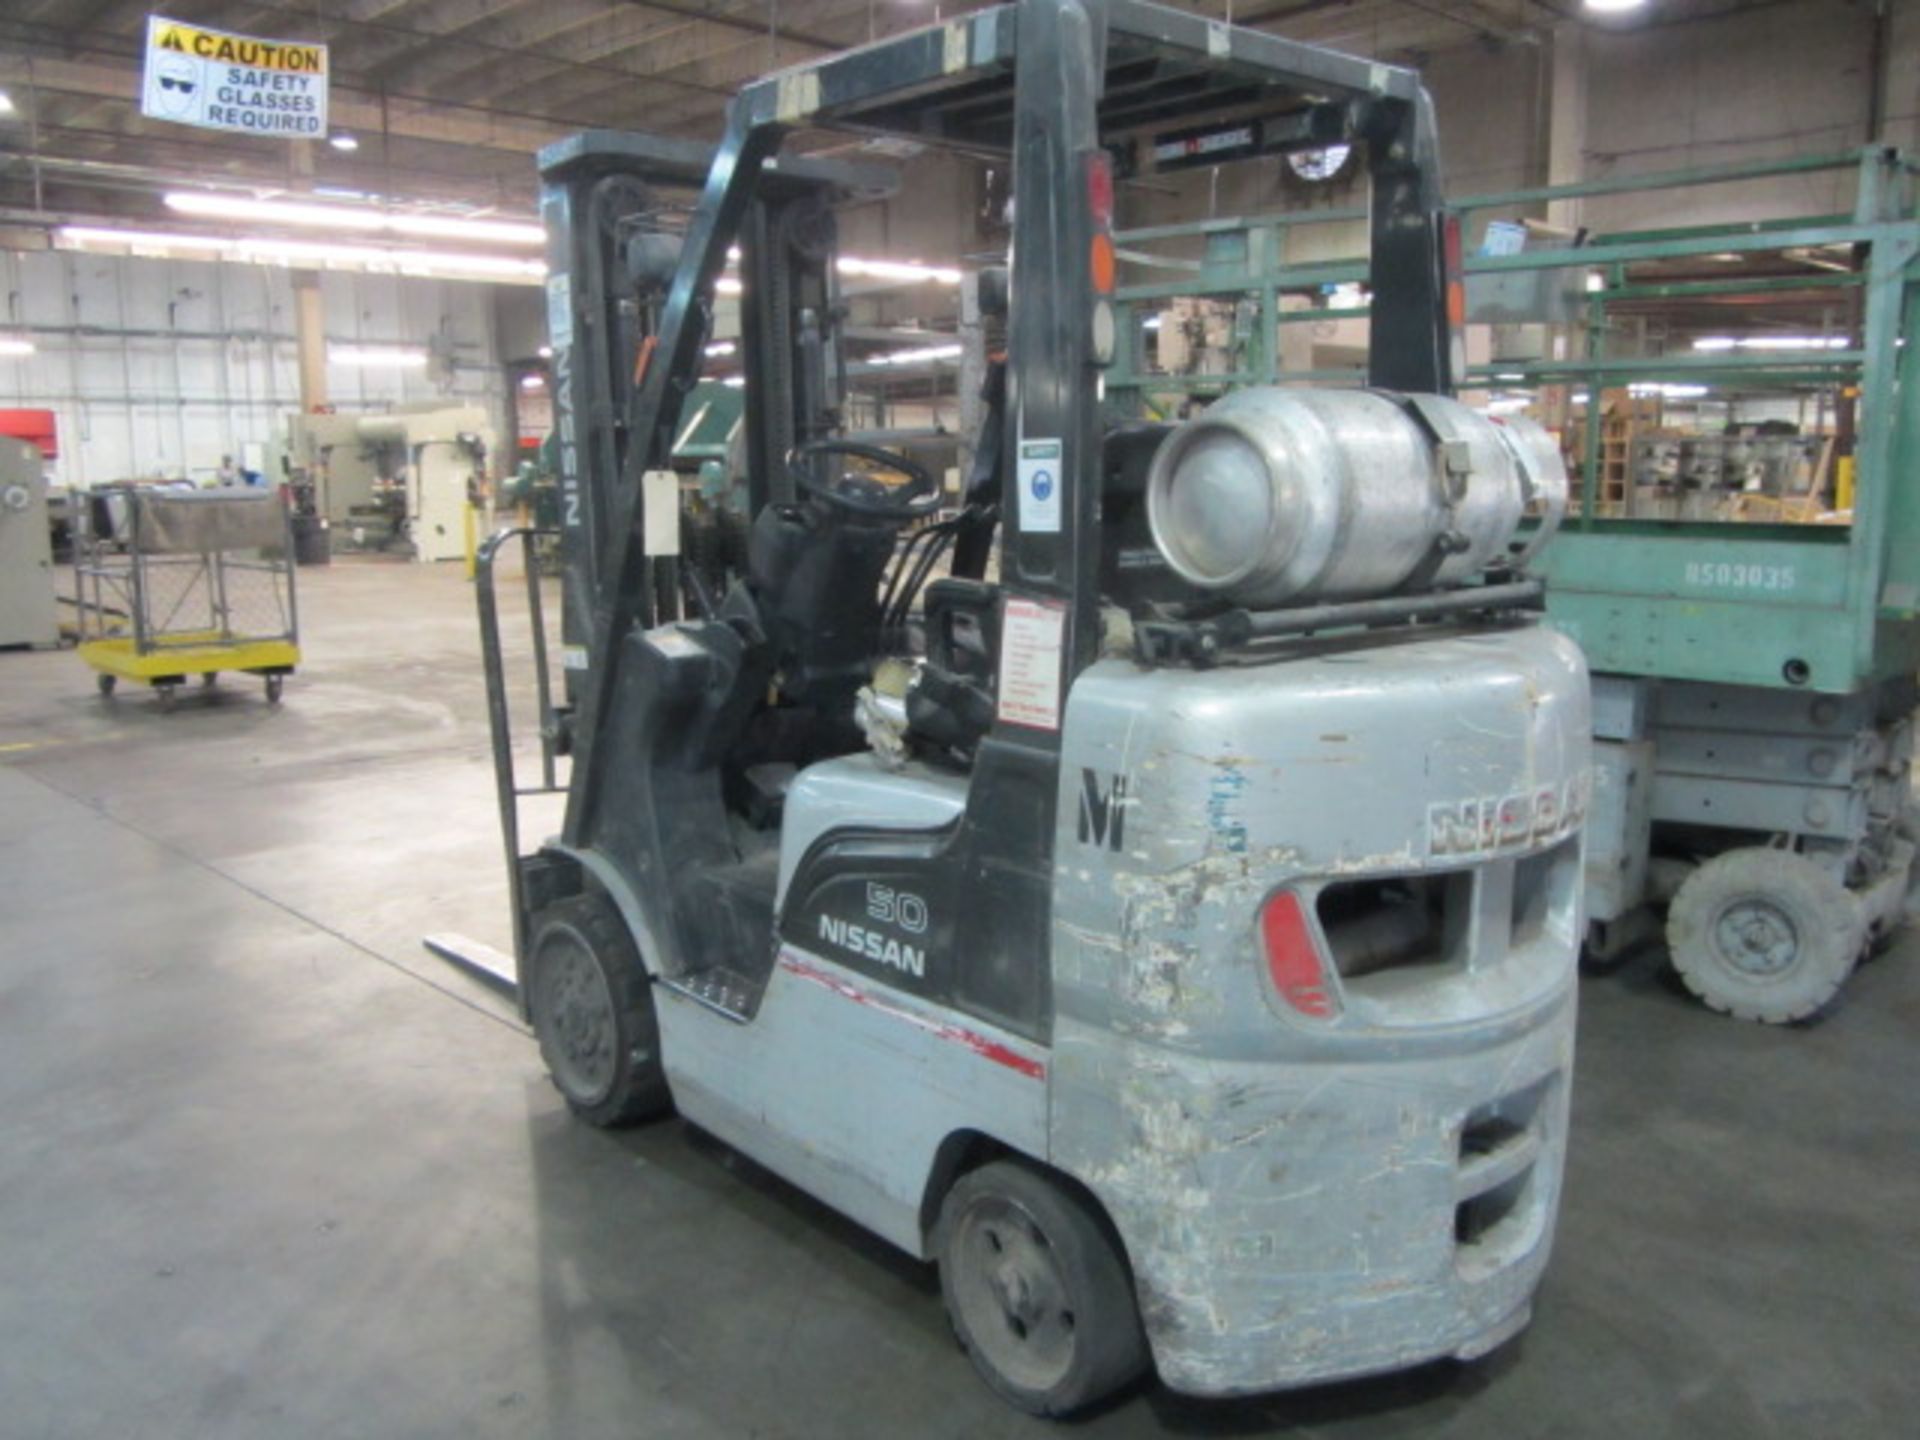 Nissan 50 4400lb Propane Forklift with 3-Stage Mast, Sideshift, sn:CPL02-9P2424 - Image 6 of 7